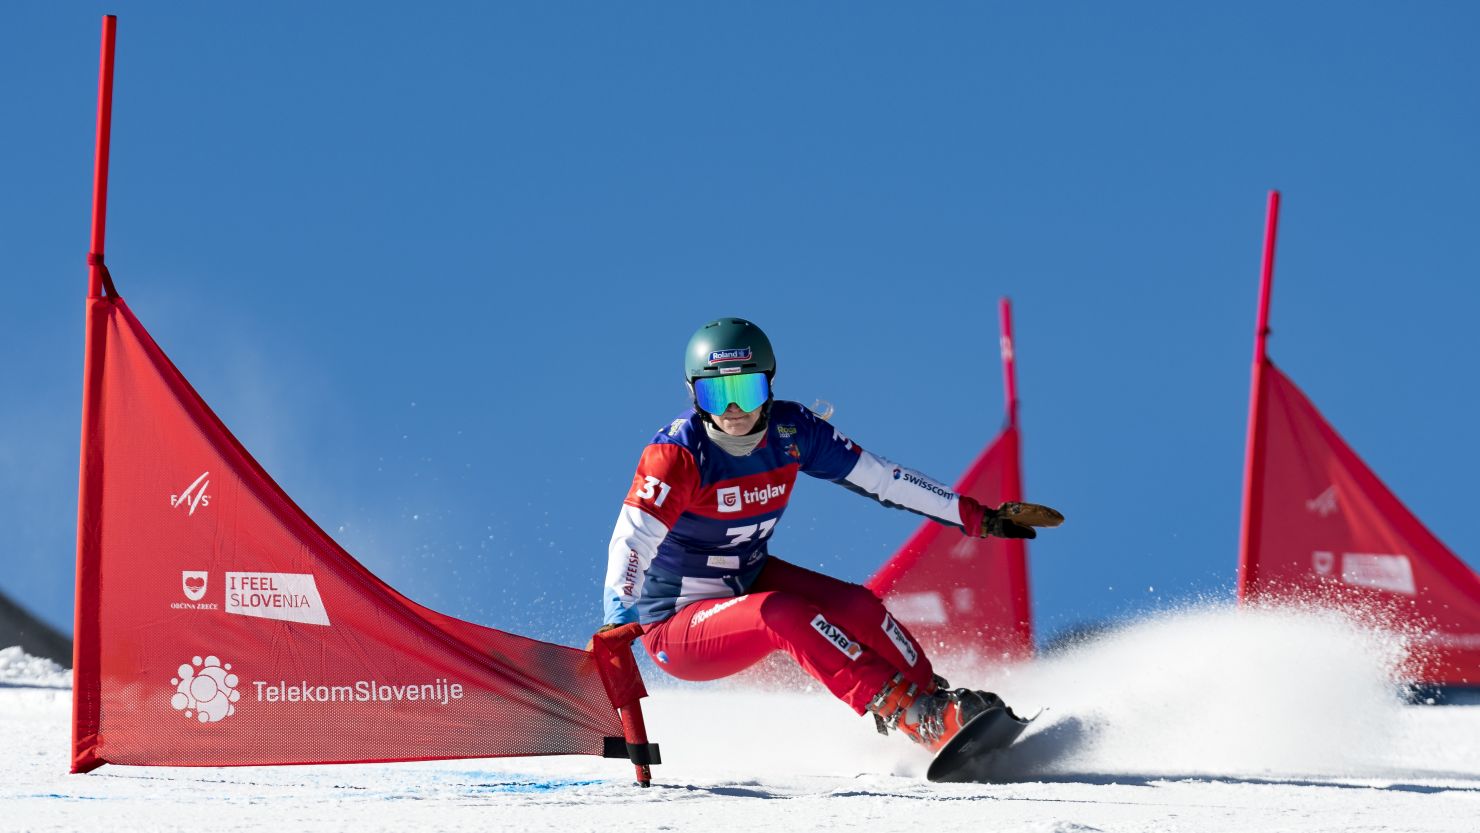 Patrizia Kummer of Switzerland competes during the women's Parallel Slalom qualification at the FIS Snowboard Alpine World Championships on March 2, 2021 in Rogla, Slovenia.